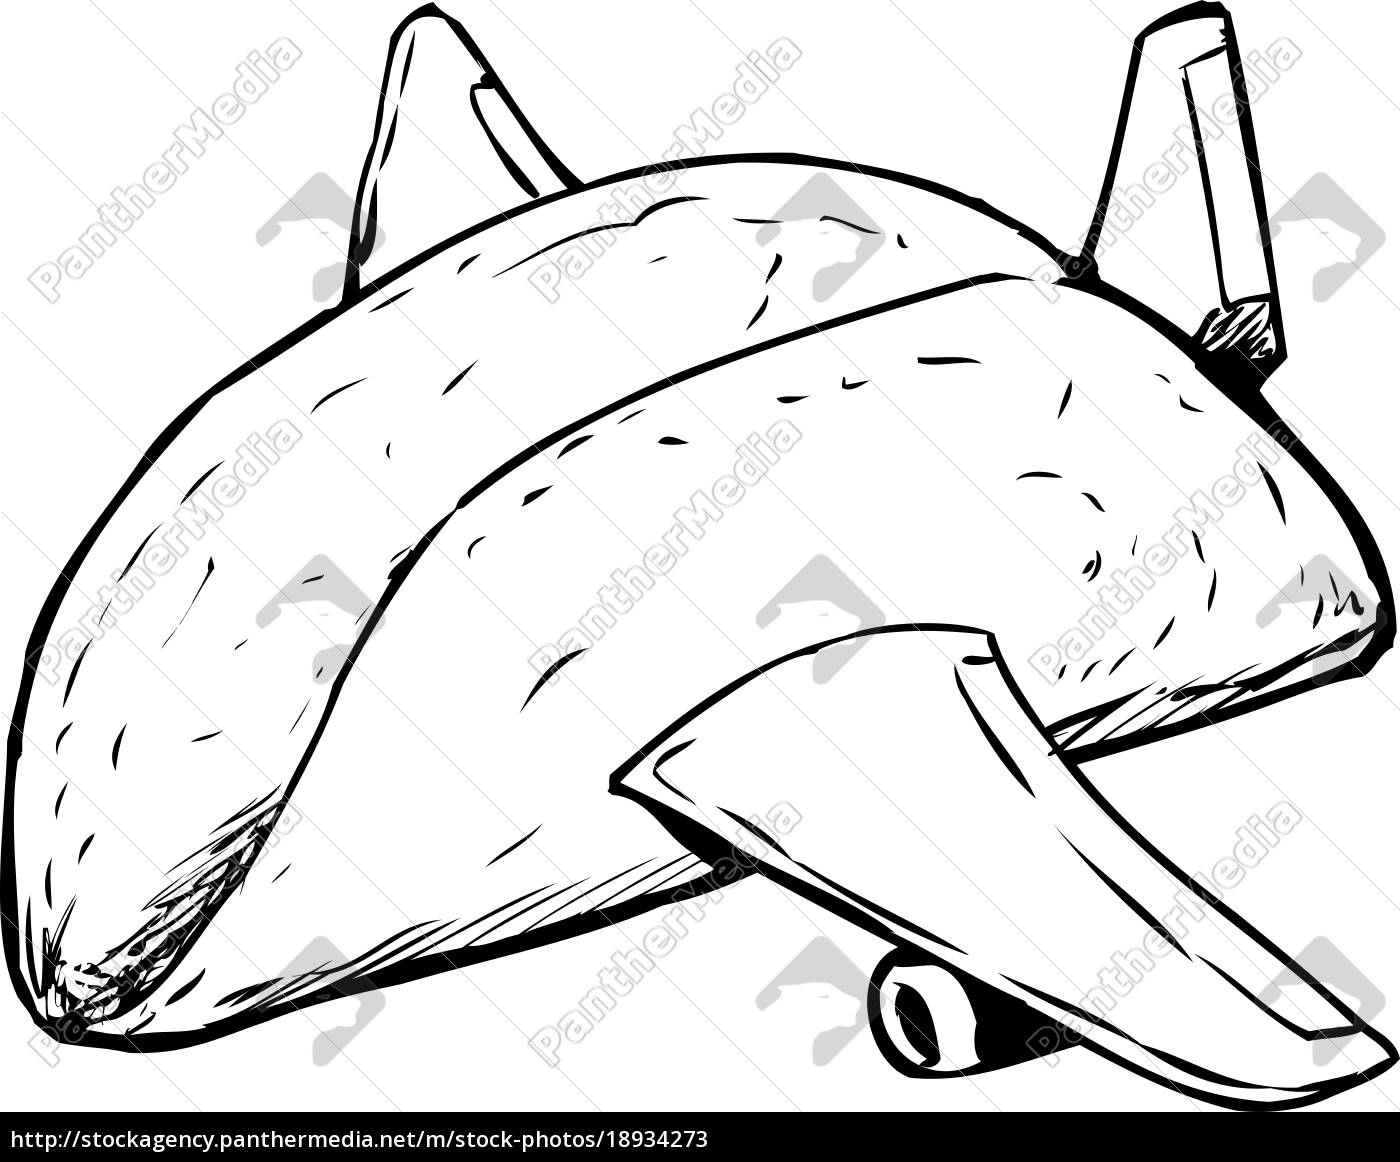 Outlined Empty Taco Shell As Jet Plane Stock Photo 18934273